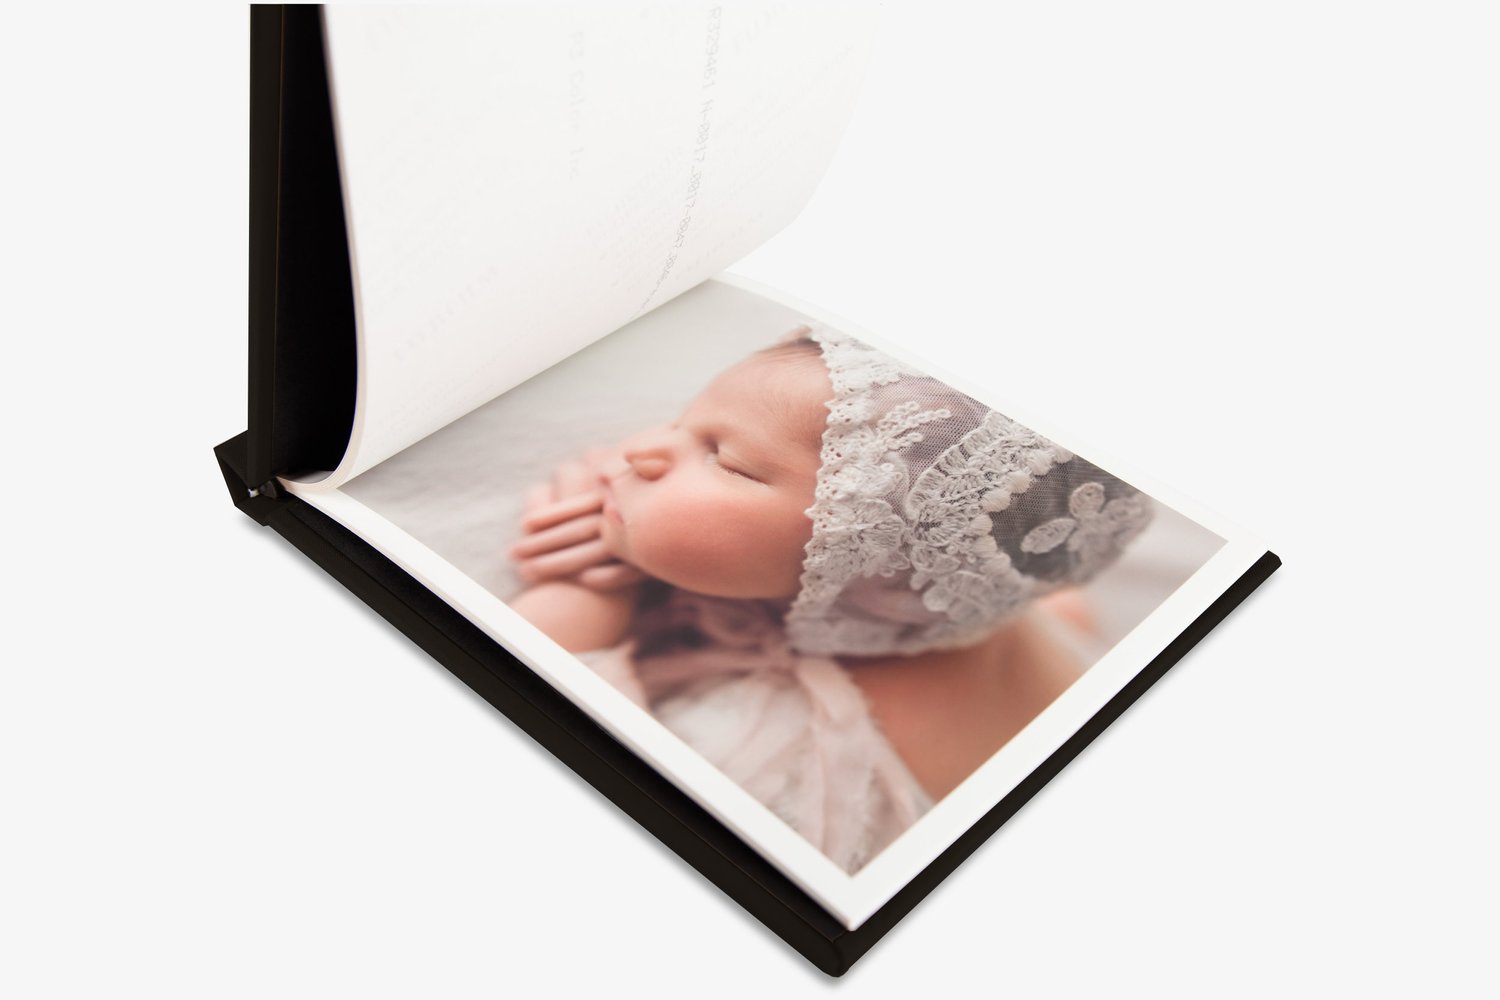 Capturing The First Year Of Your Baby In A Photo Book